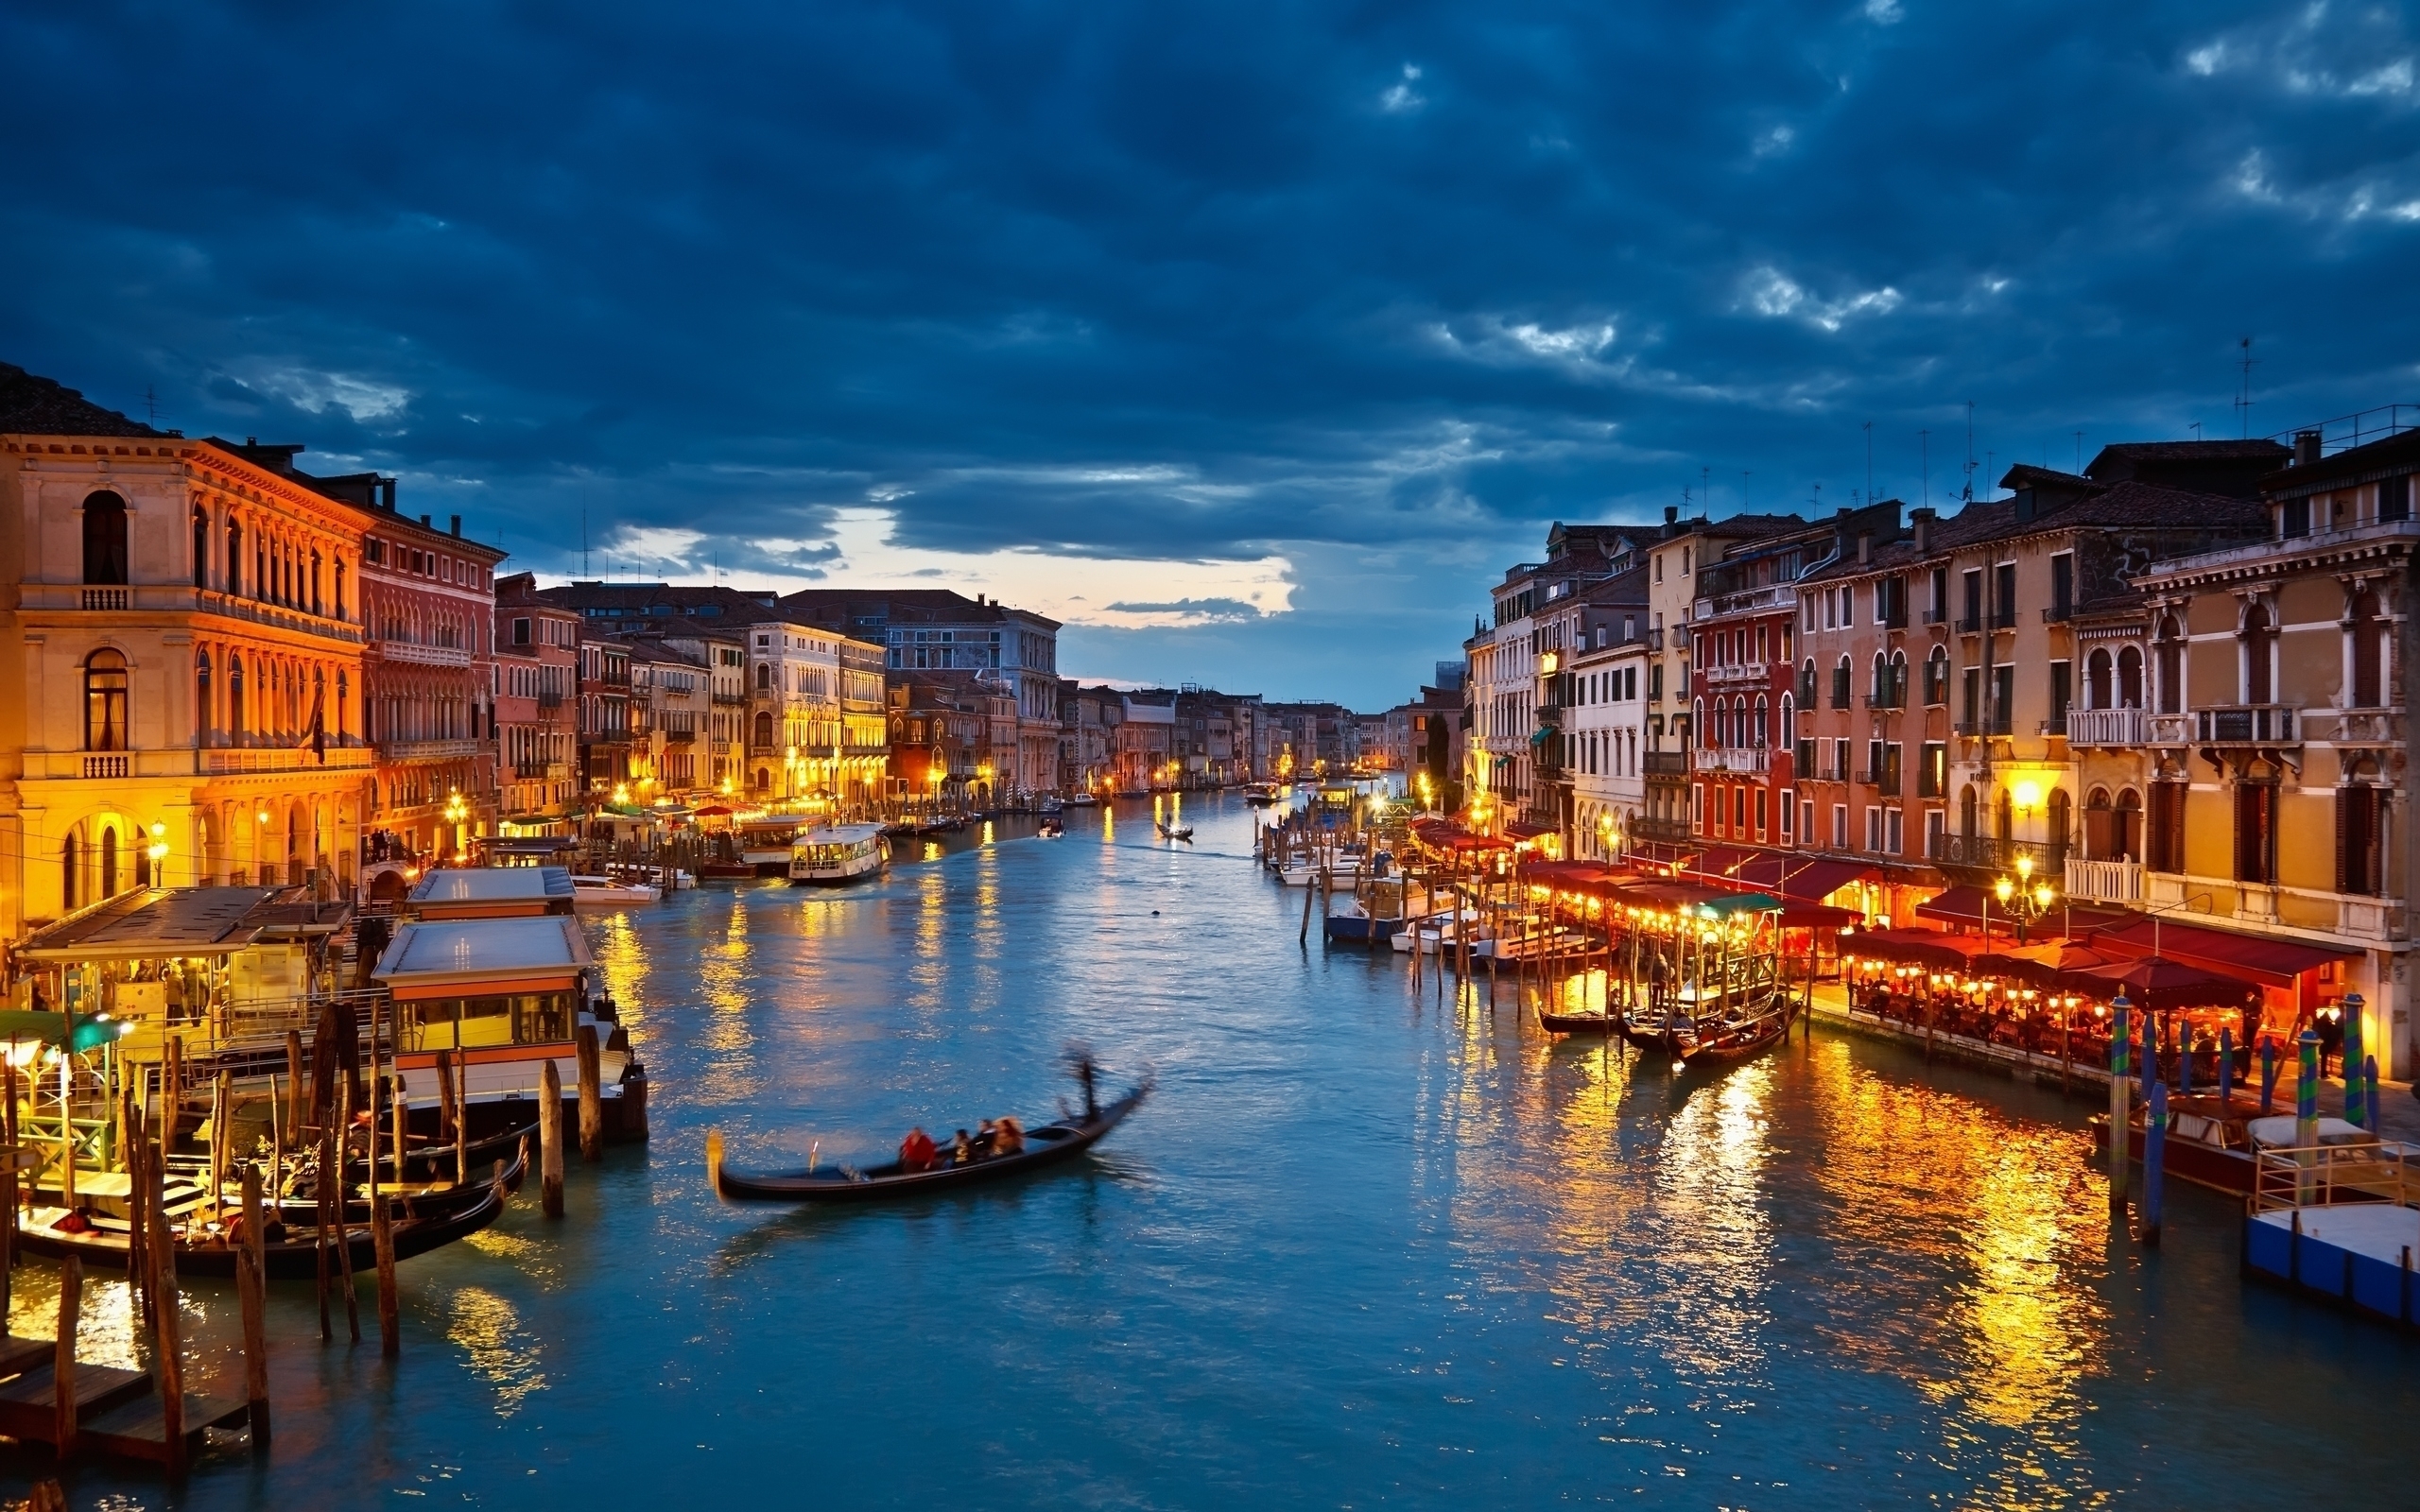 Night in Venice for 2560 x 1600 widescreen resolution